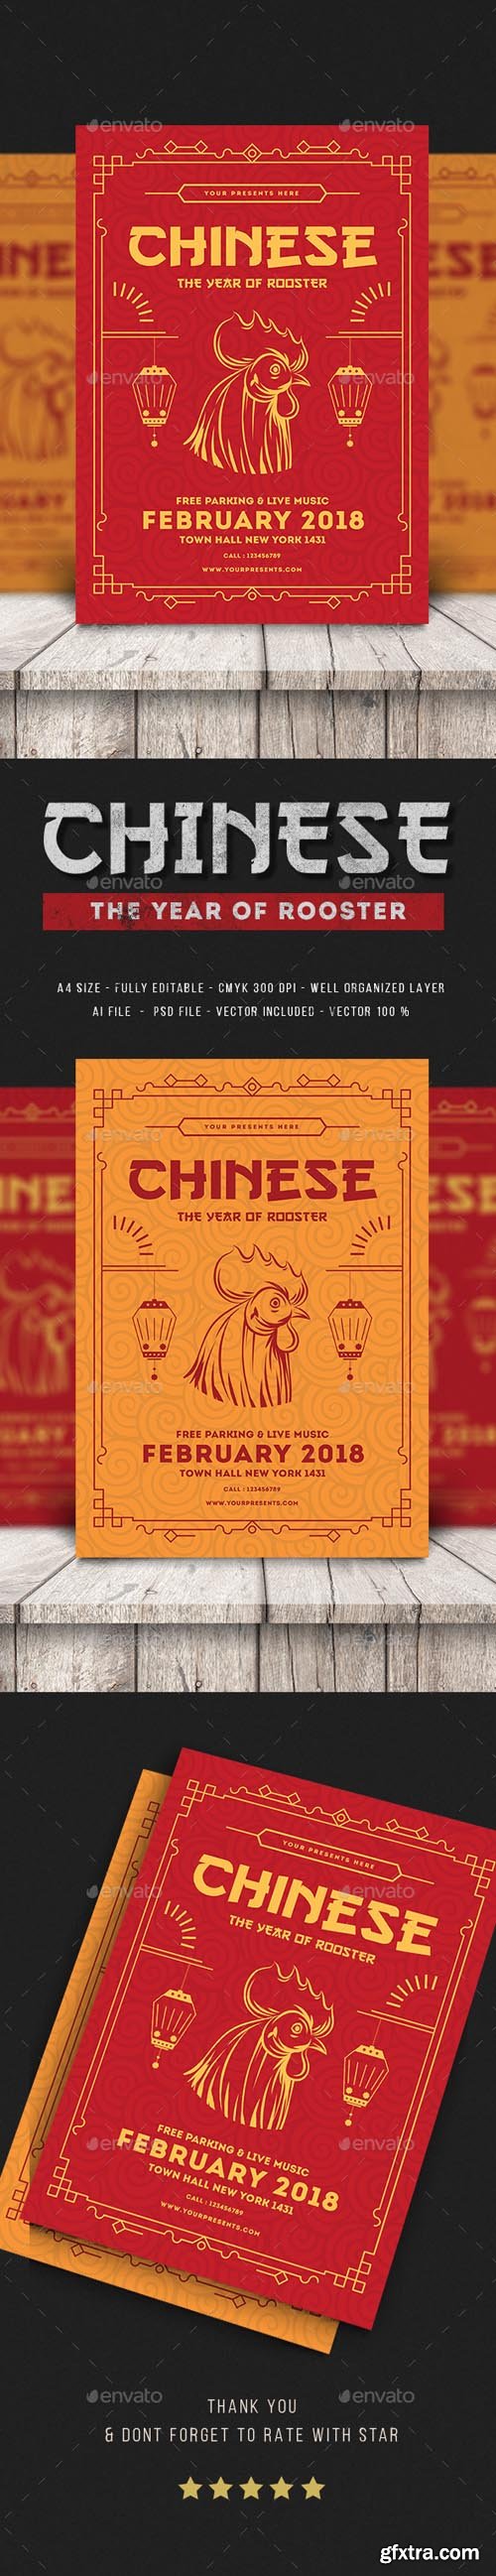 GR - Chinese New Year 19293910